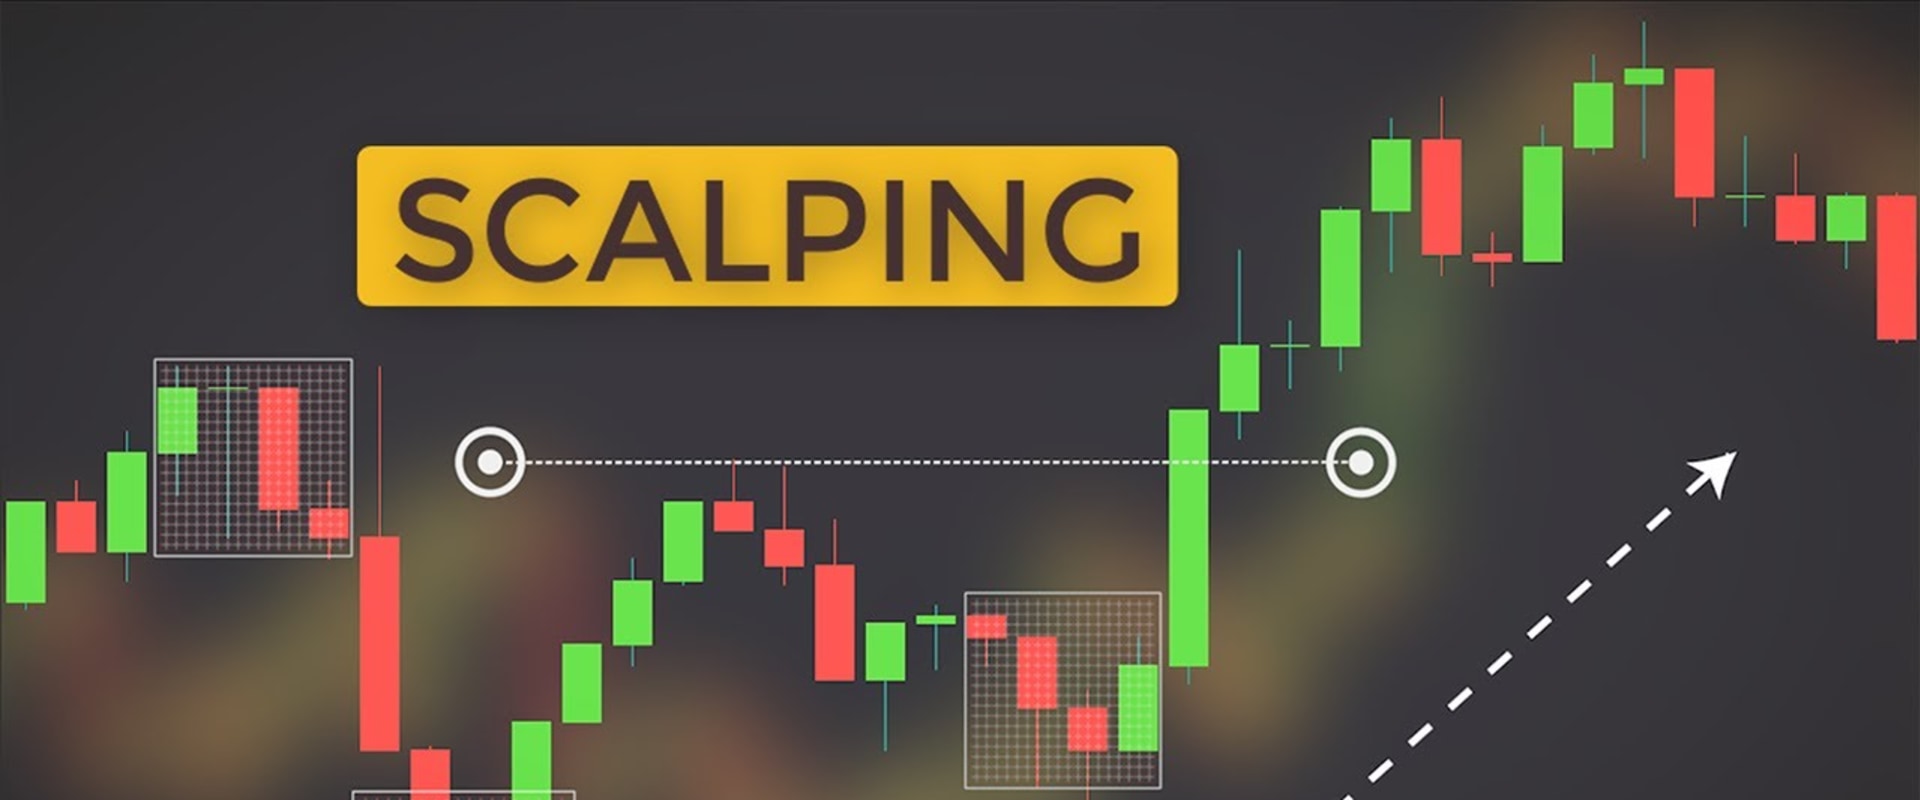 What is the most profitable scalping strategy?